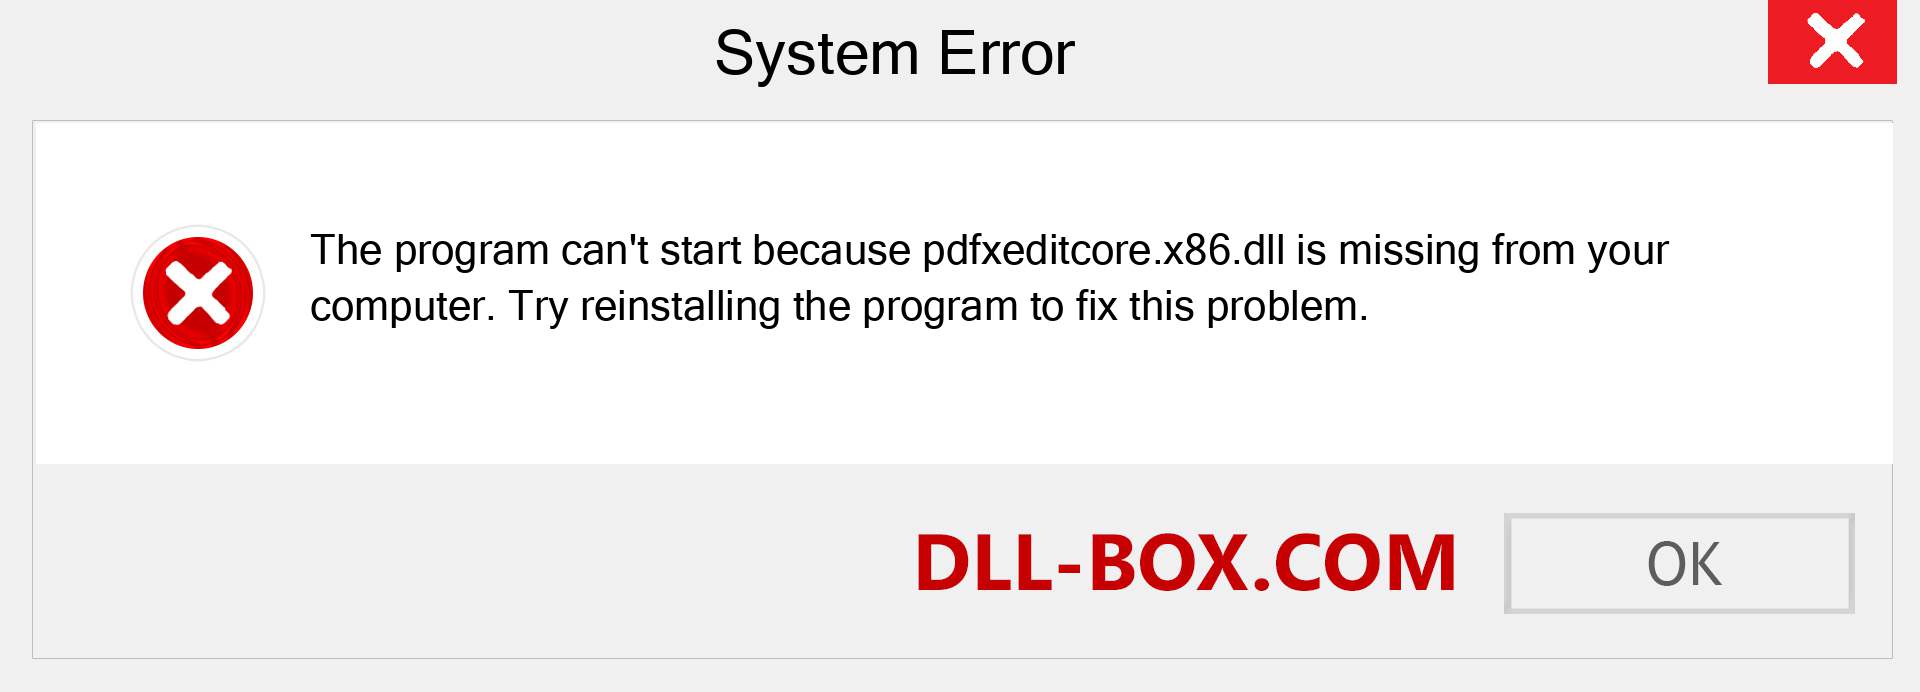  pdfxeditcore.x86.dll file is missing?. Download for Windows 7, 8, 10 - Fix  pdfxeditcore.x86 dll Missing Error on Windows, photos, images